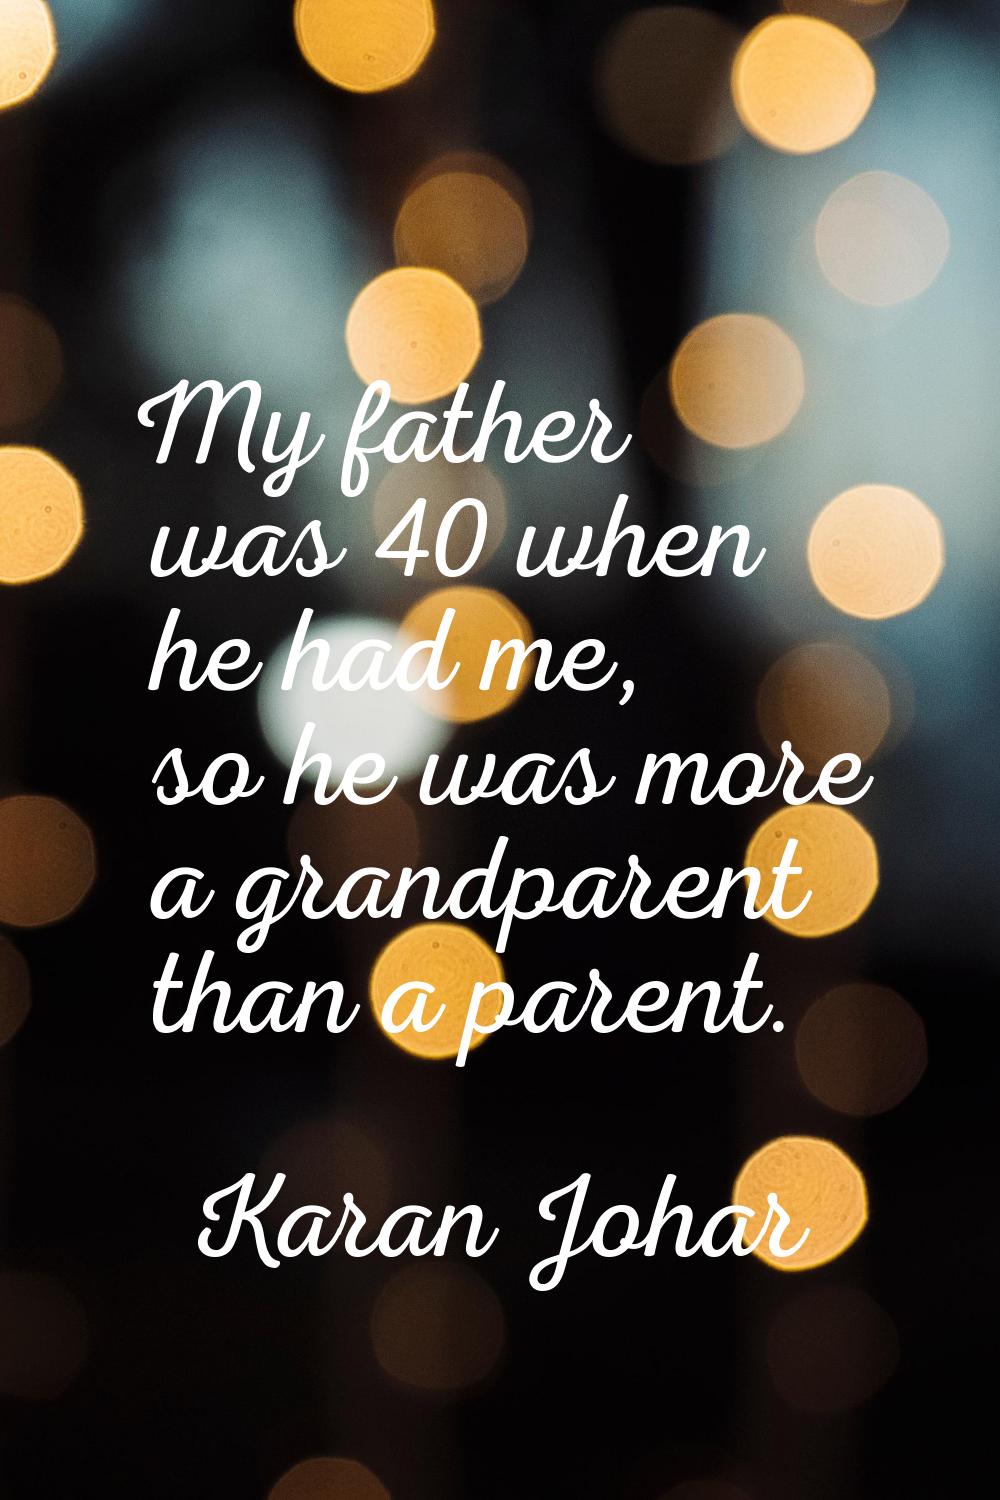 My father was 40 when he had me, so he was more a grandparent than a parent.